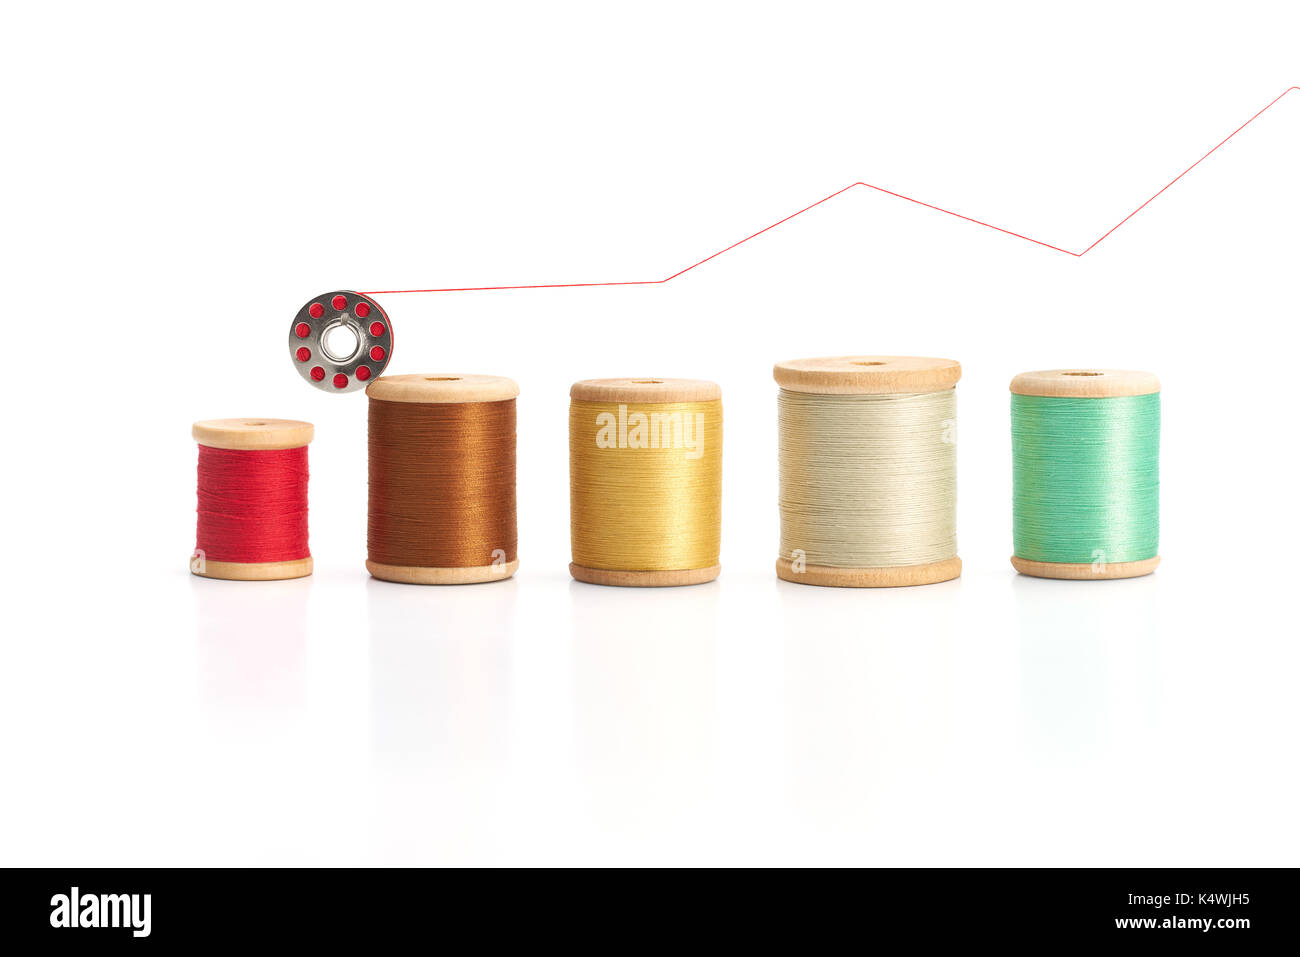 Bobbin thread forming a graph chart on white background Stock Photo